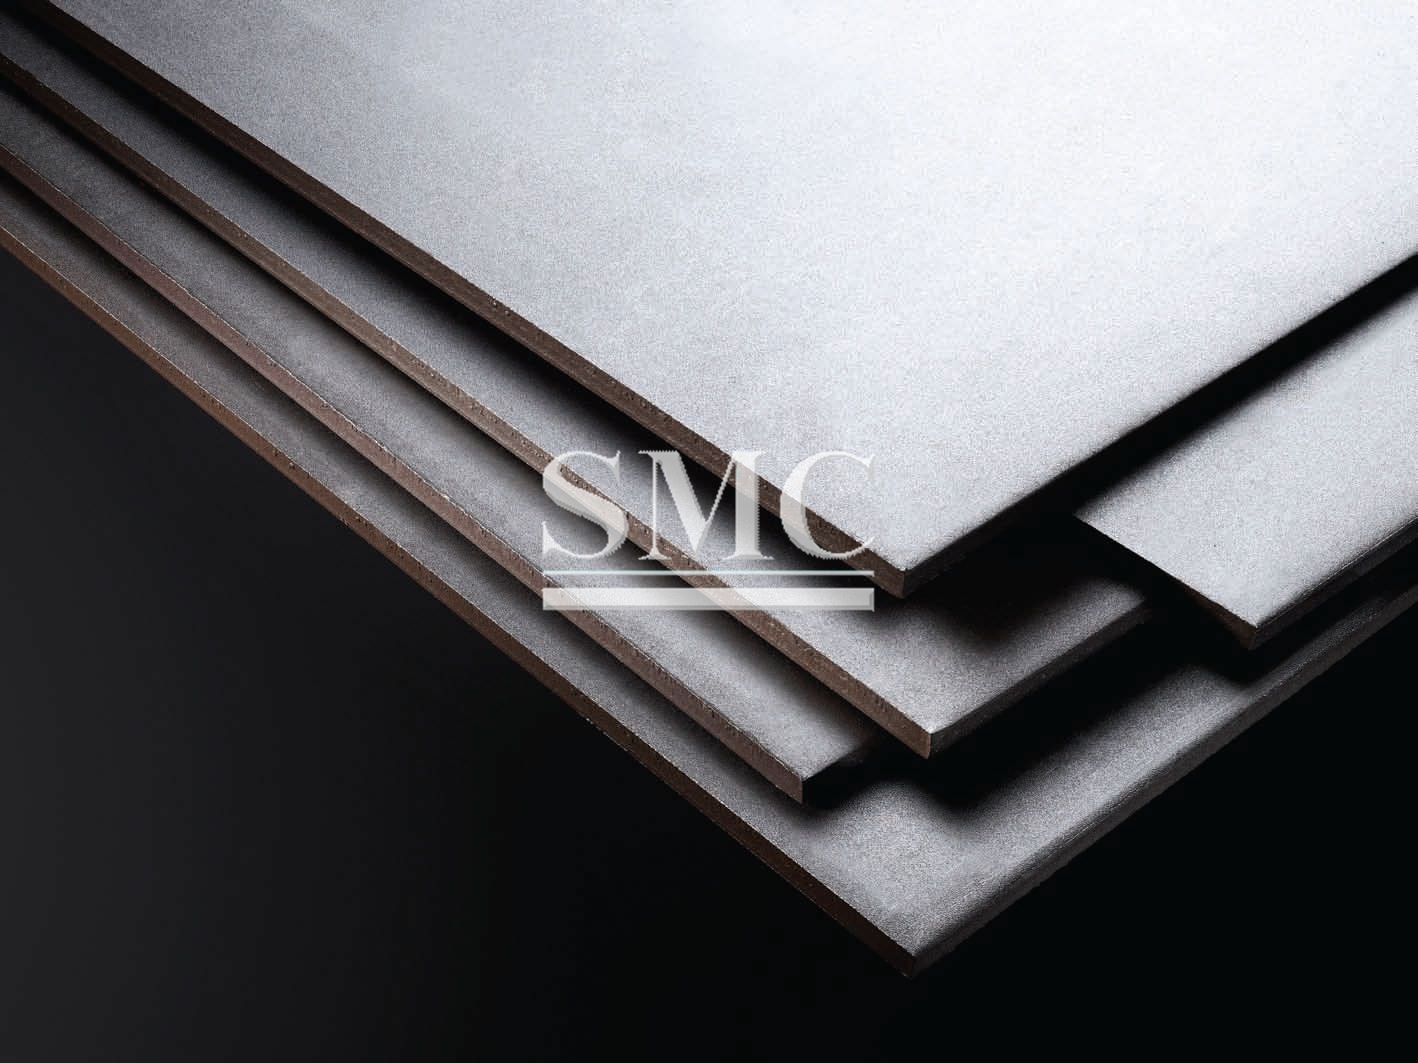 Why color stainless steel drawing board in decoration industry for a long grace